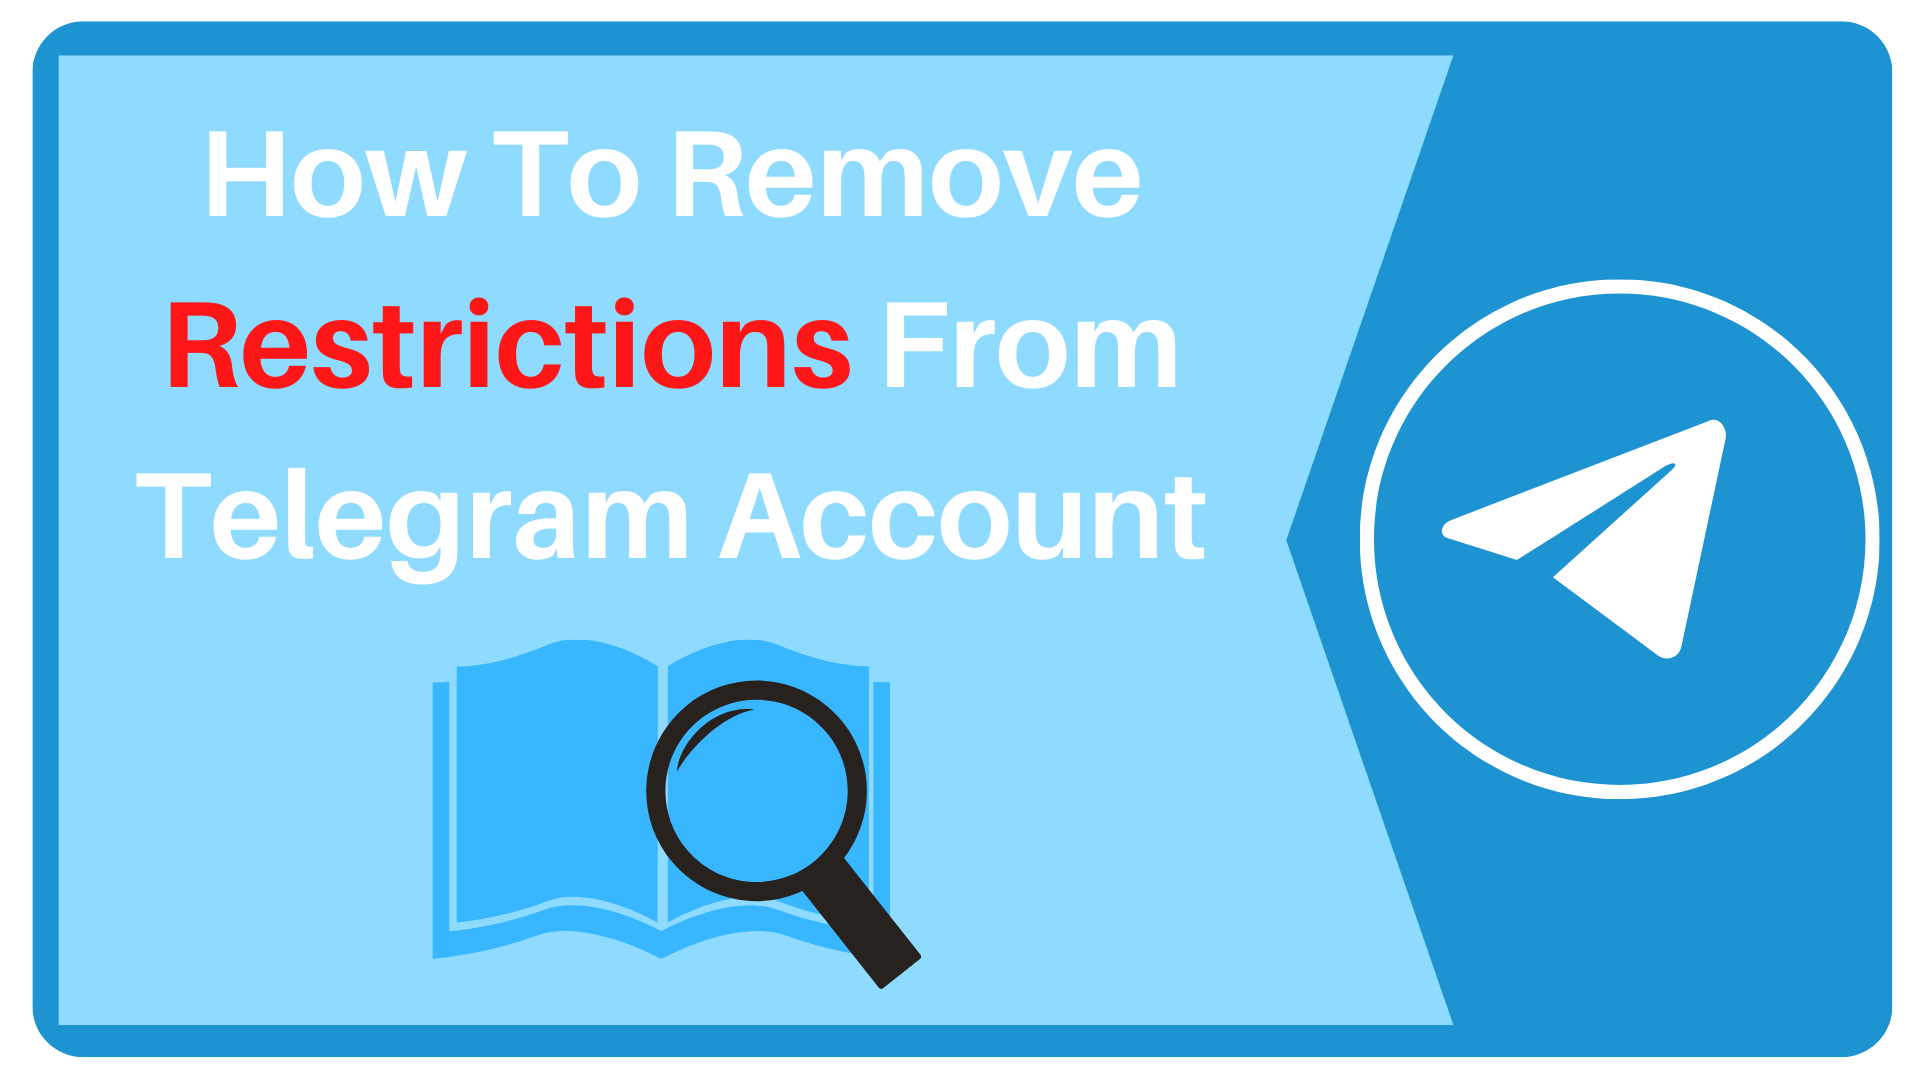 How To Remove Restrictions From Telegram Account